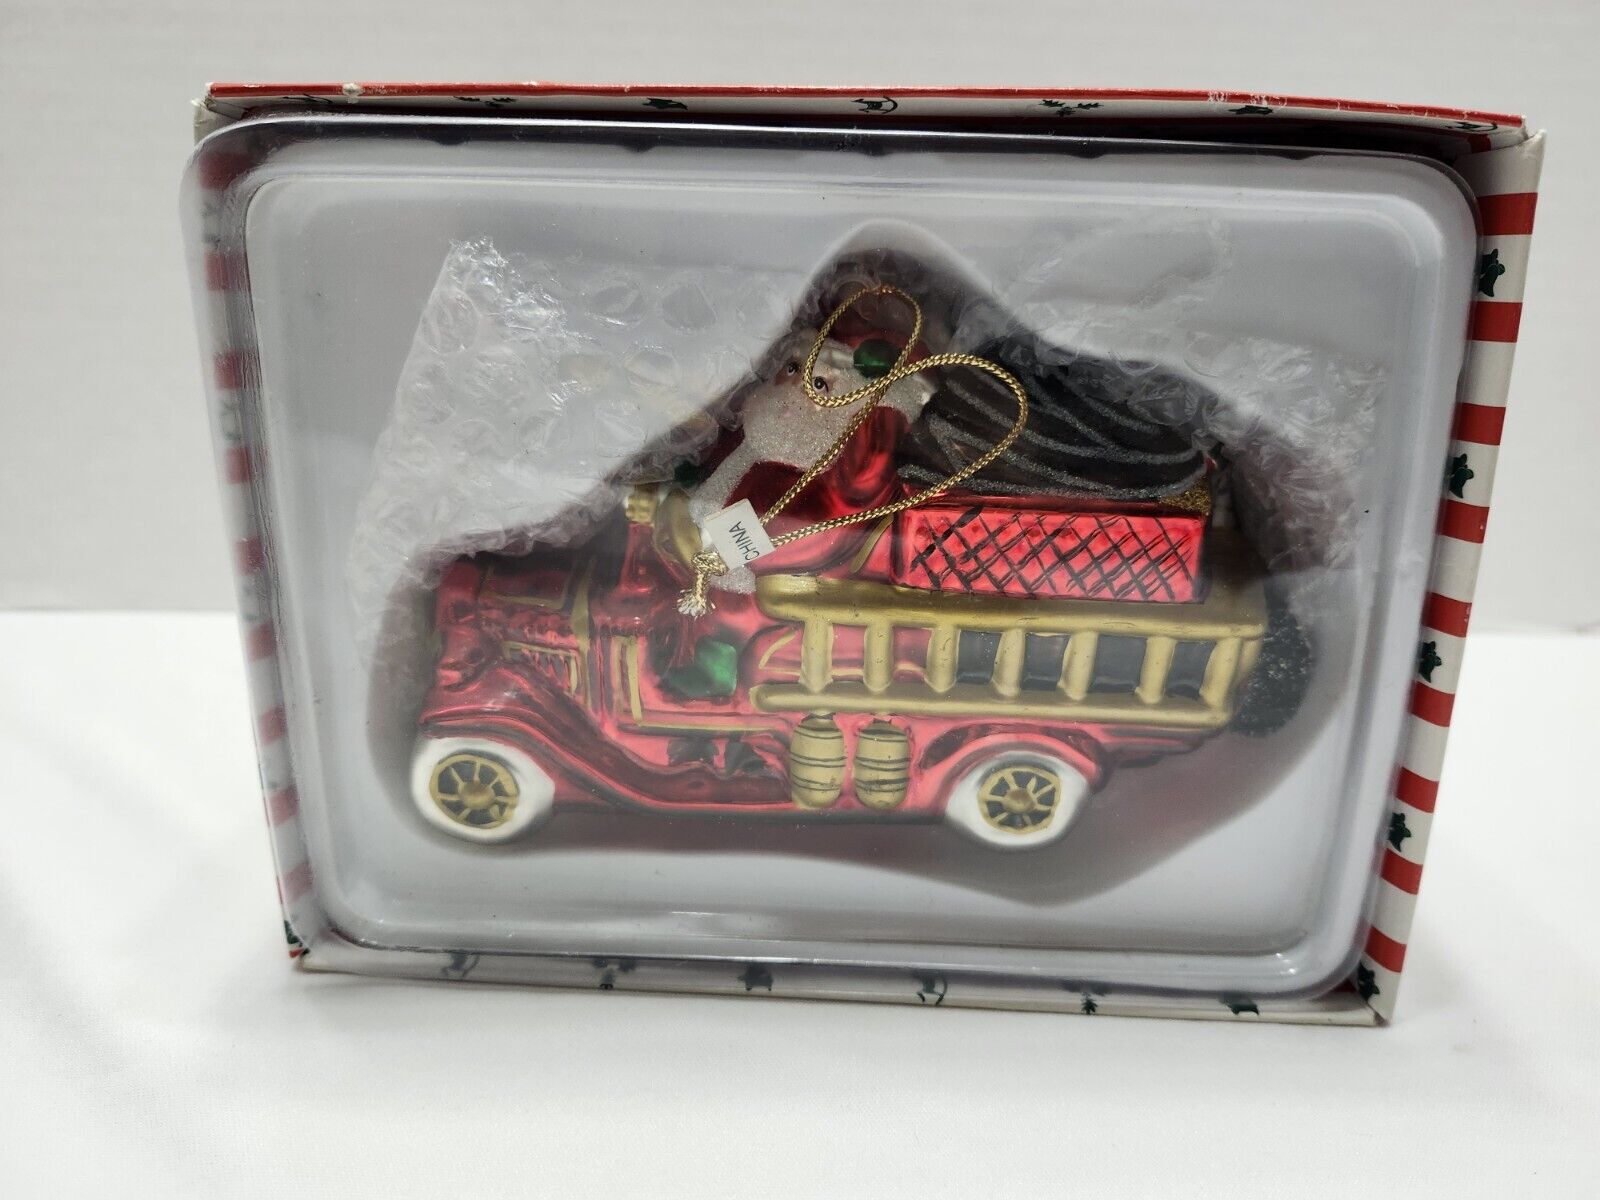 Department 56 Large Fire Truck with Santa and Dalmatian Ornament